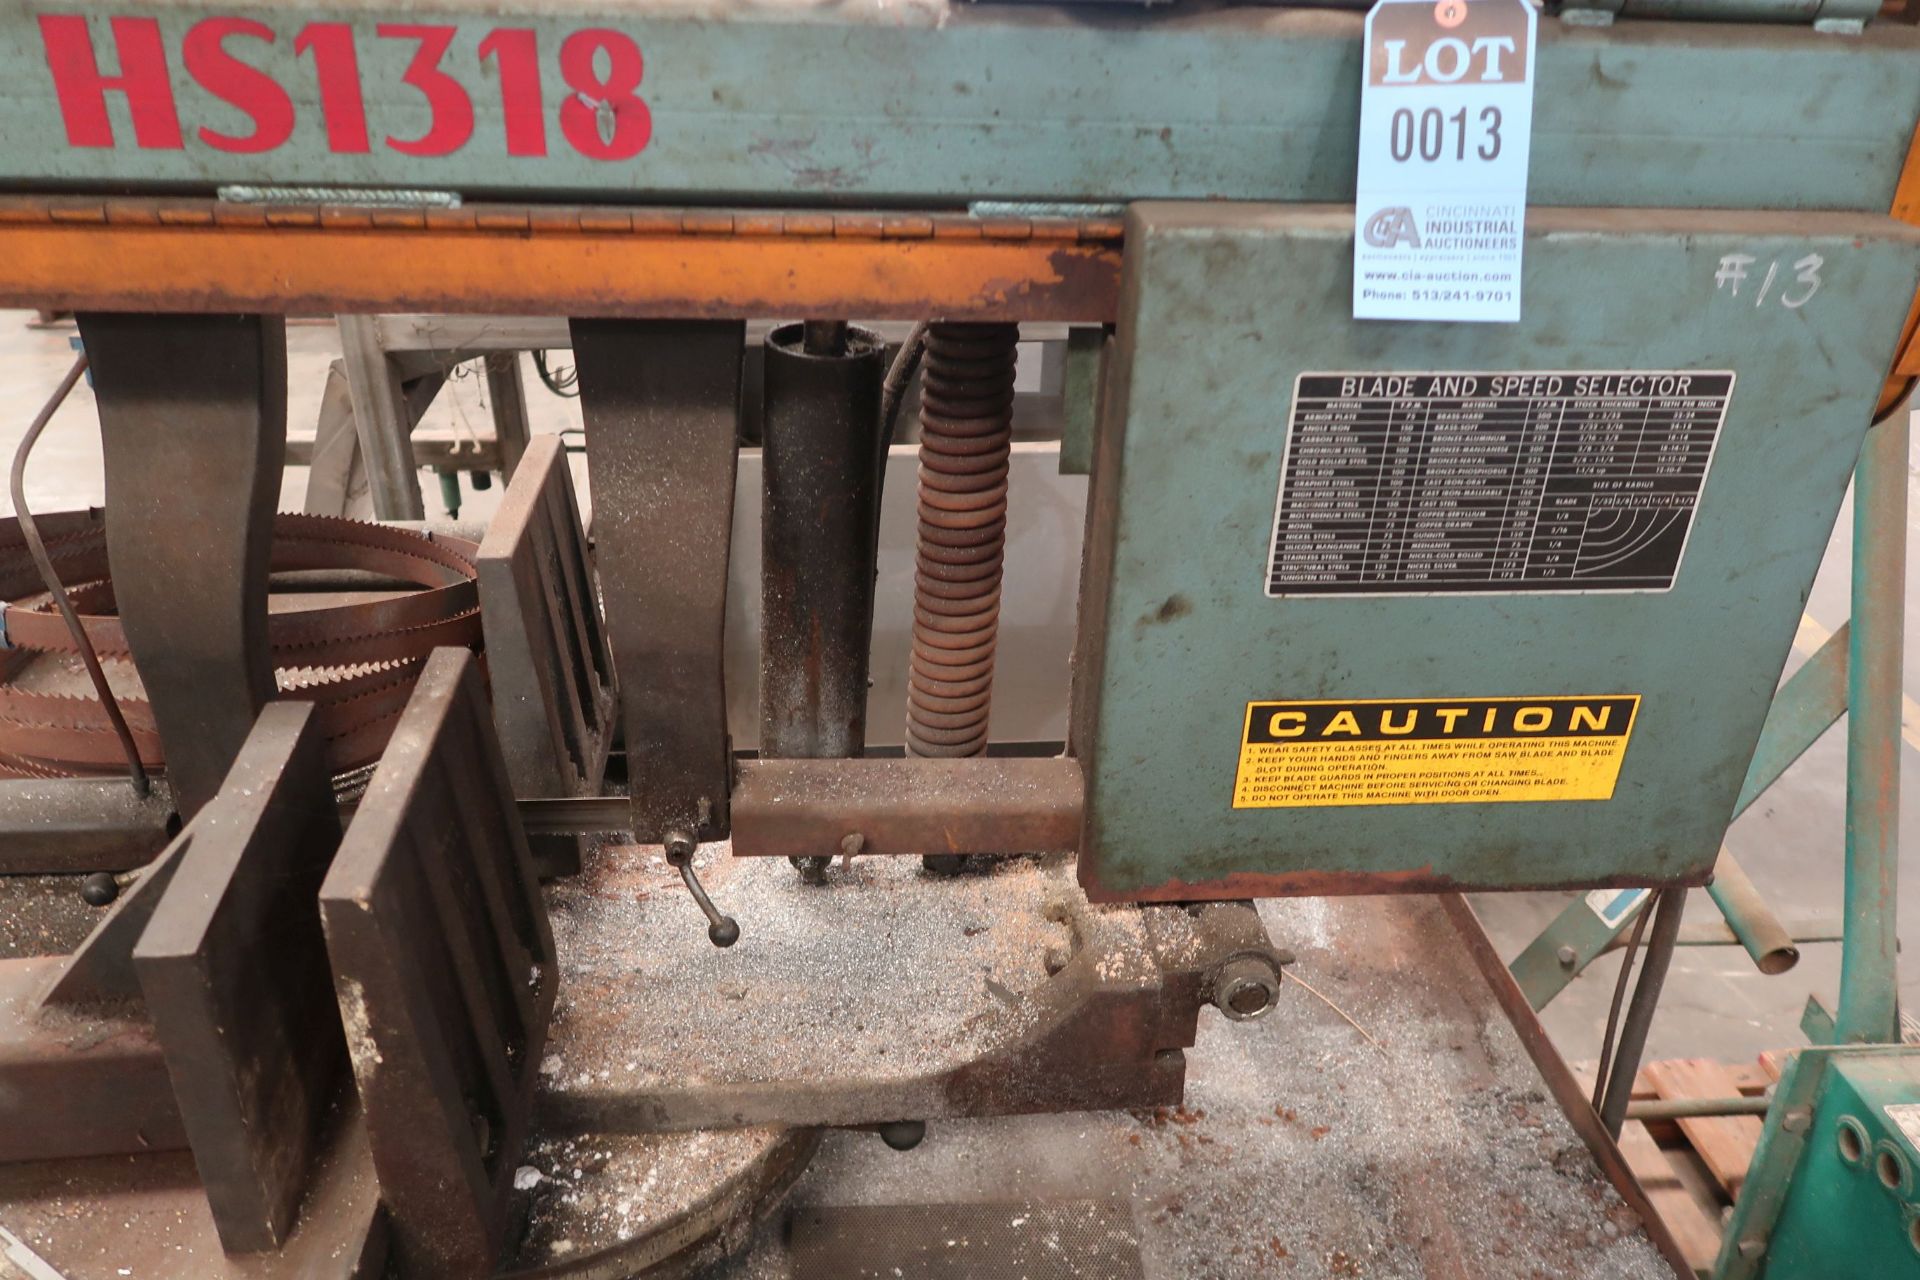 12" X 18" ROLL-IN KIZZER HS1318 HORIZONTAL BAND SAW - Image 3 of 3